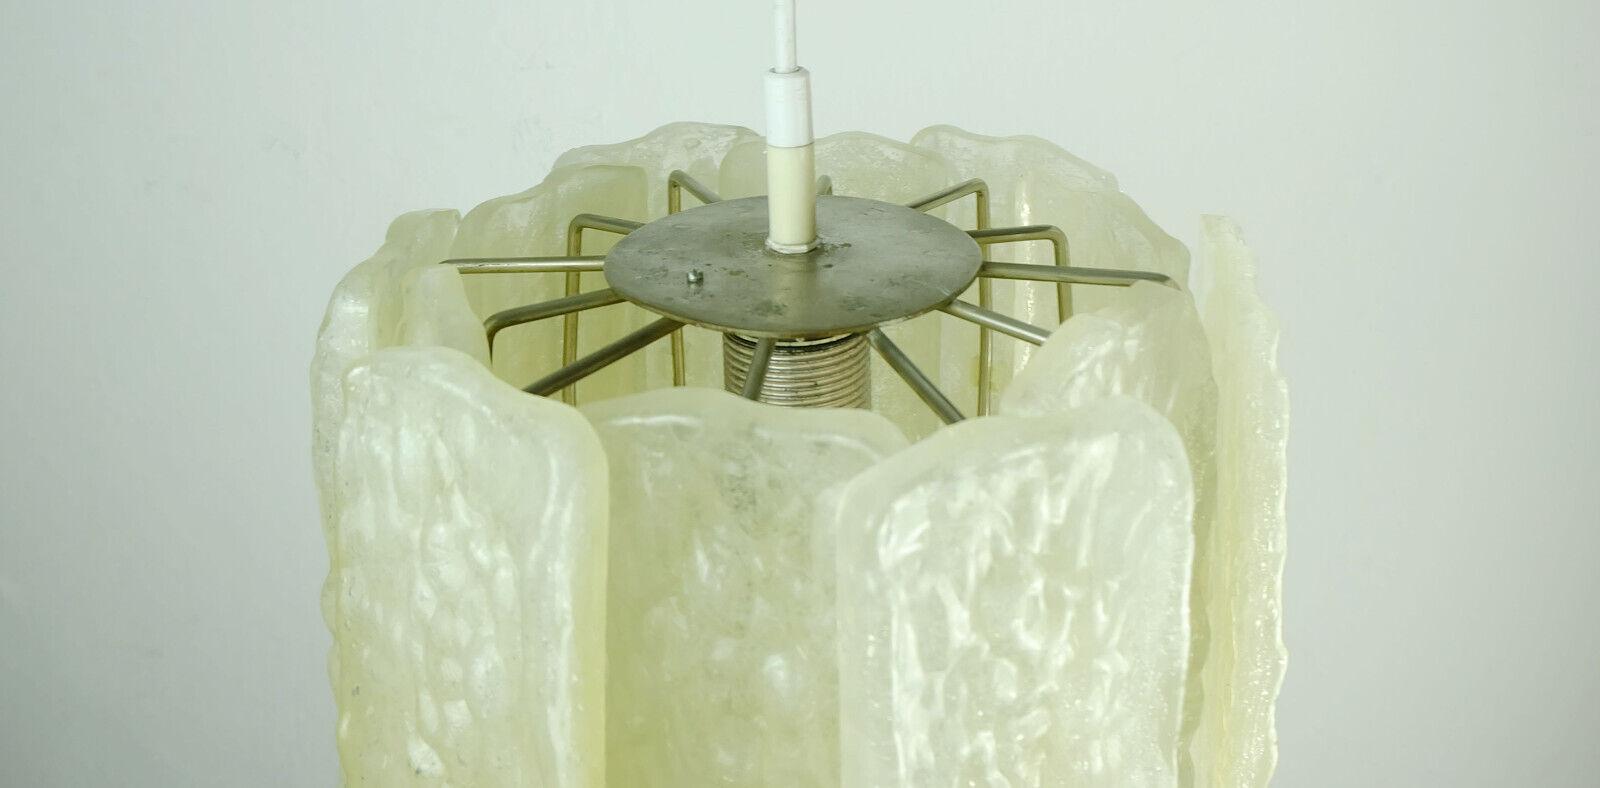 Late 1960s to 1970s pendant light. The frame is made of silver-colored metal. The shade consists of 12 rectangular acrylic discs with an ice glass look that are attached to the support rods. In the middle there is a socket for an E27 light